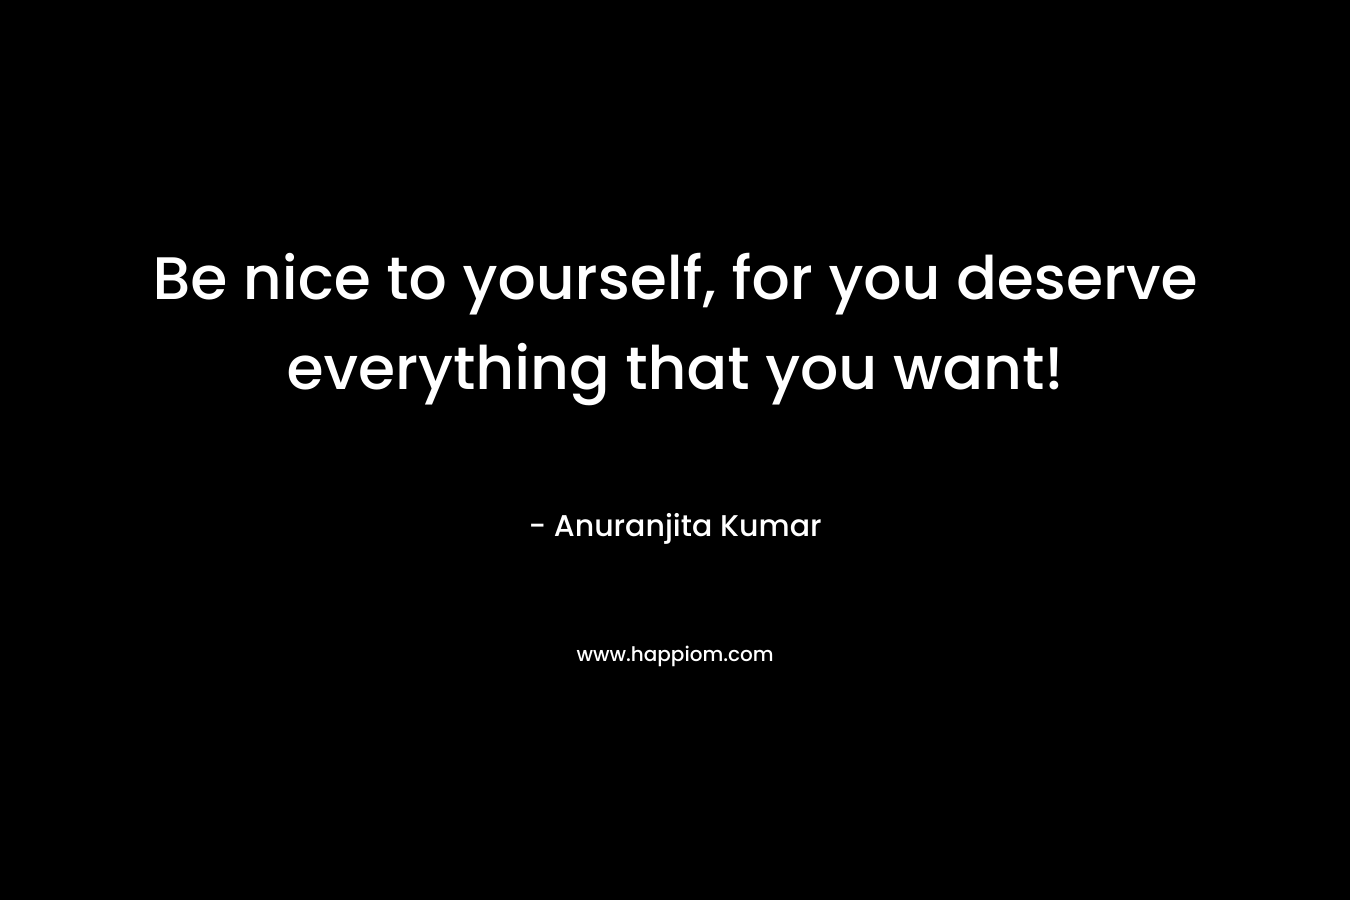 Be nice to yourself, for you deserve everything that you want!